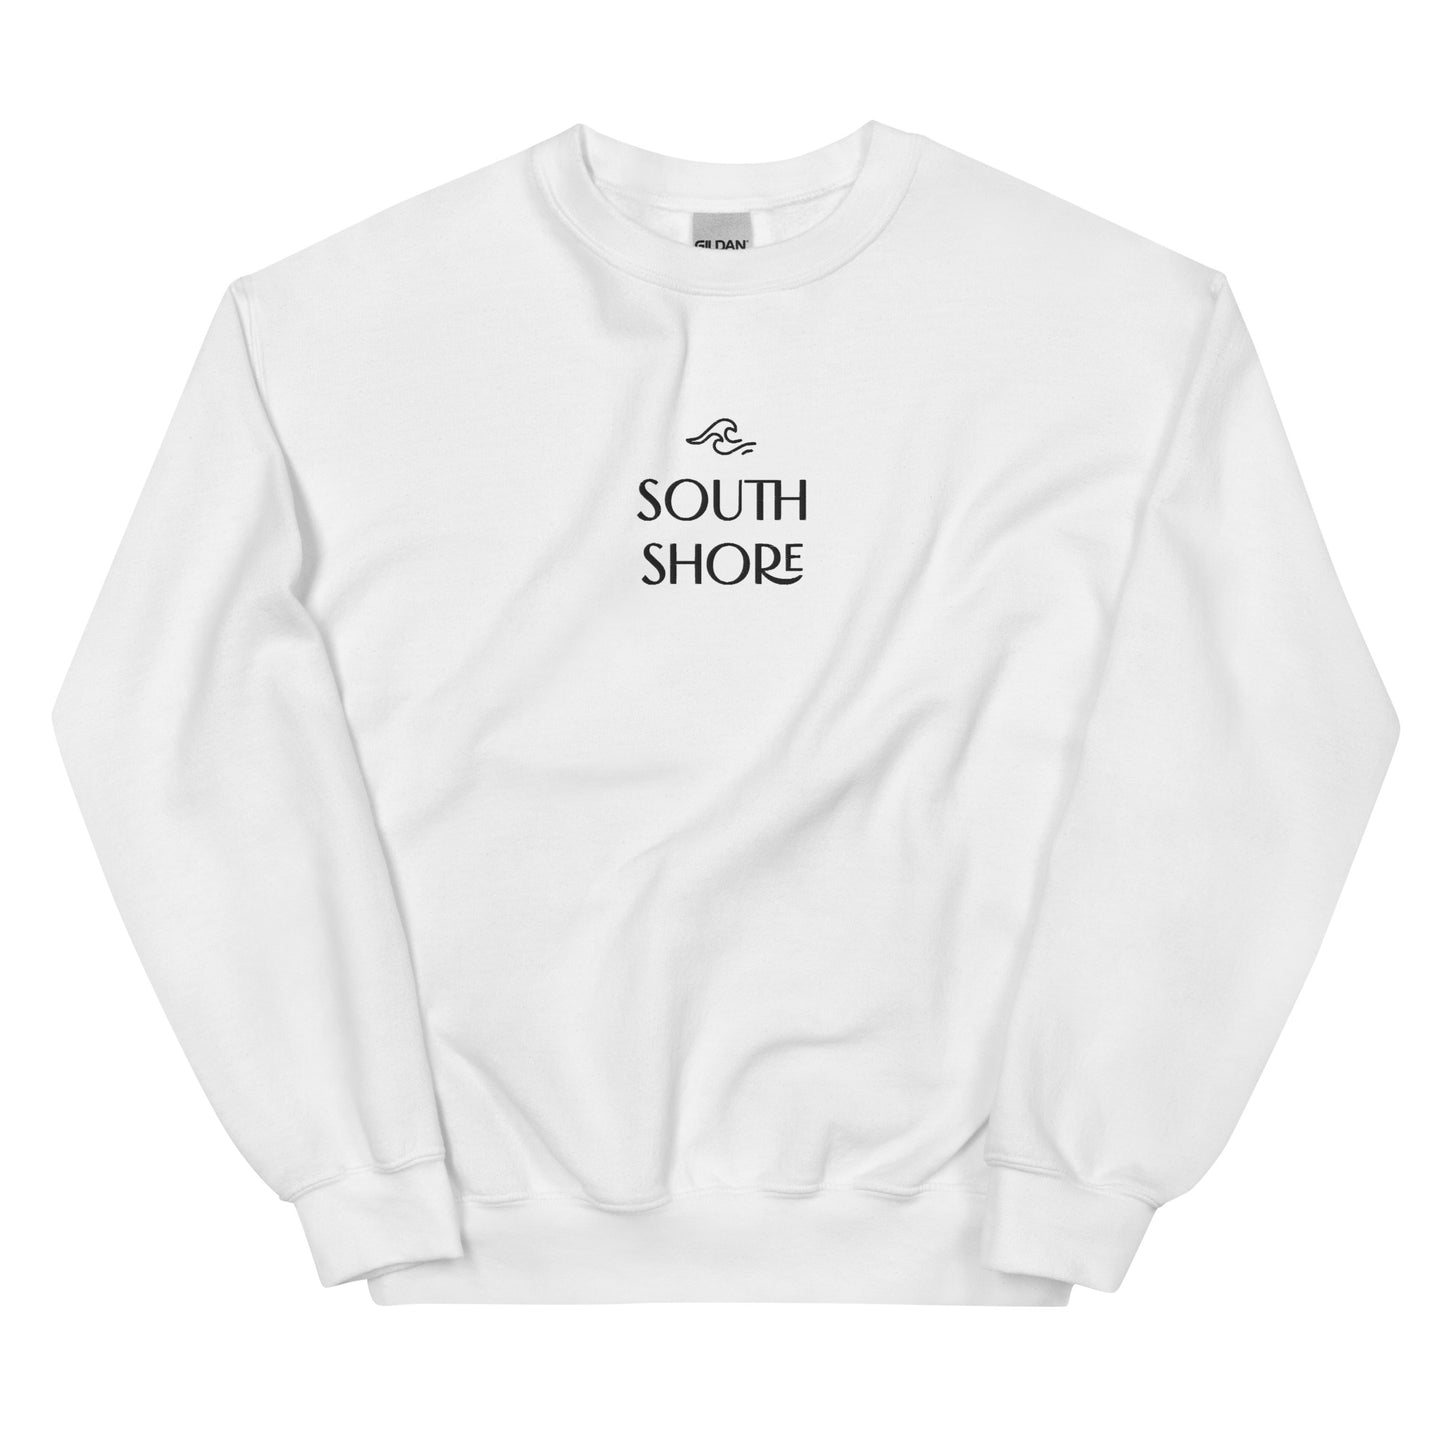 white crewneck that says "south shore" in black lettering with wave graphic